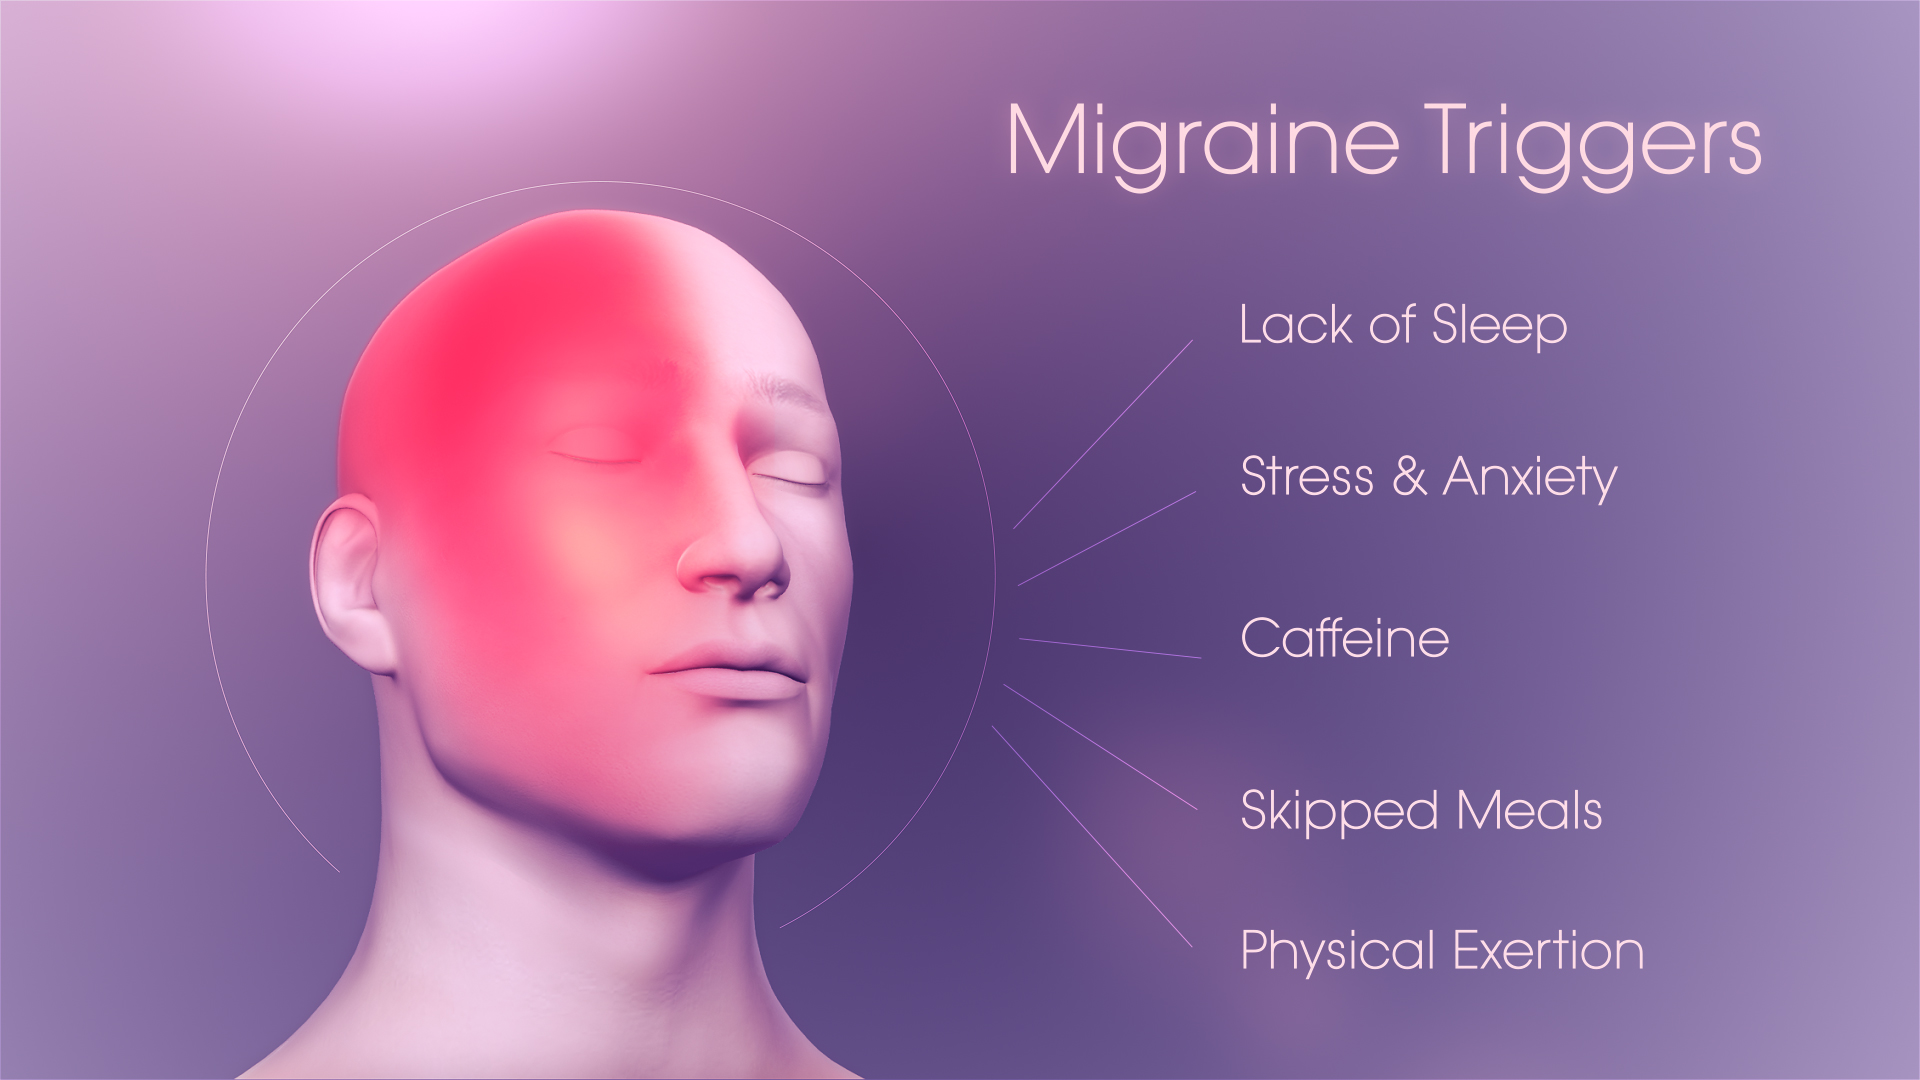 Medical  Animation Showing Migraine Triggers